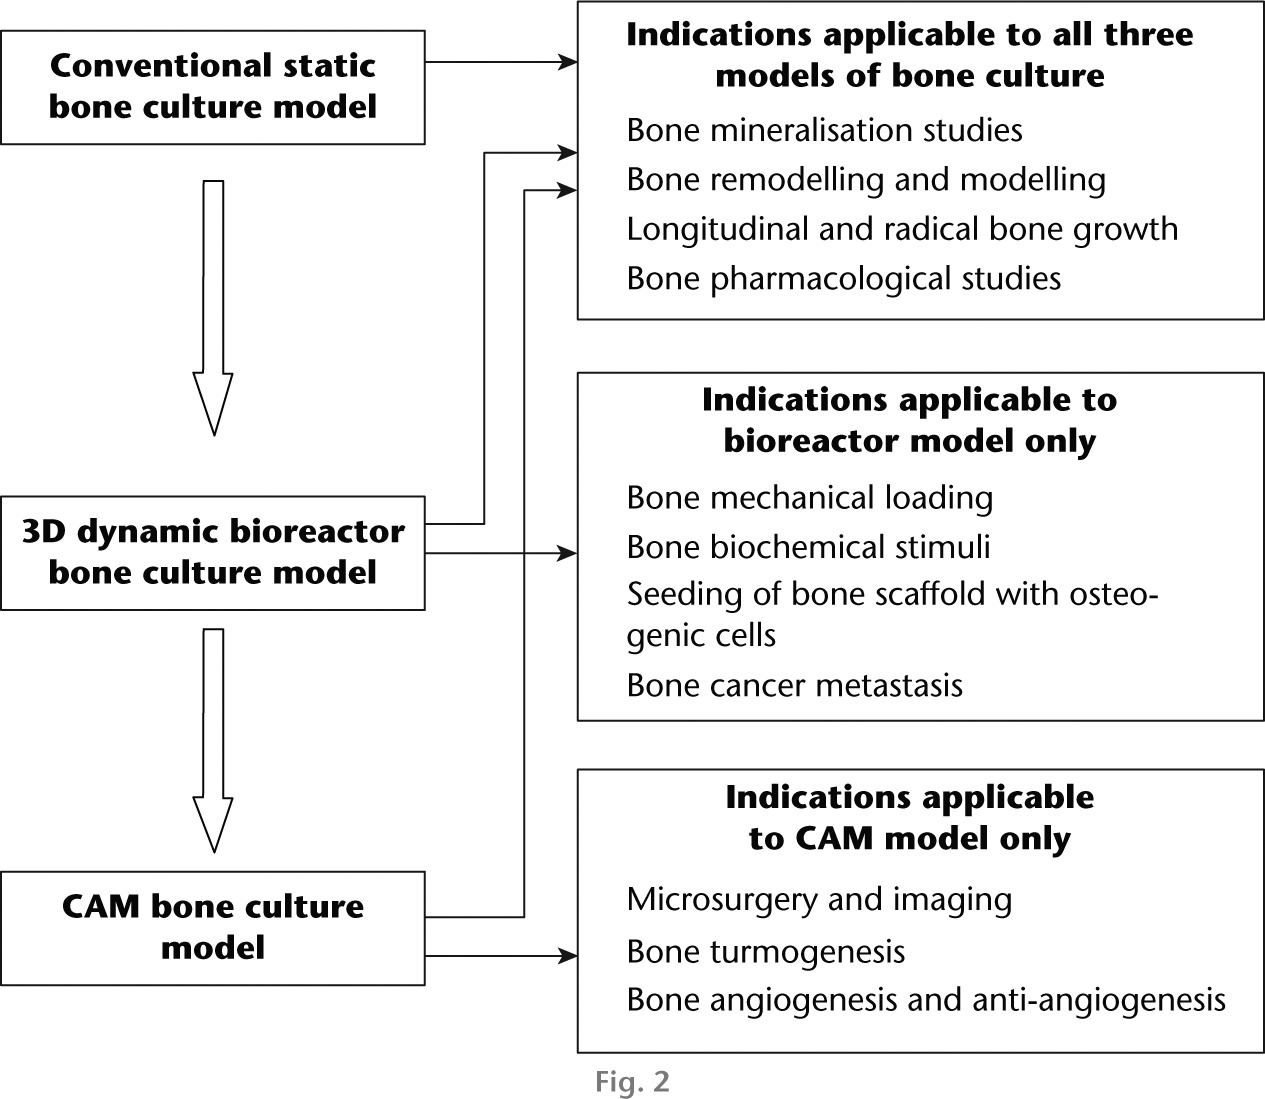 Fig. 2 
            Order of preclinical application of the ex vivo rodent bone culture models and their indications in bone growth, development and related fields of studies. Note that all indications that are applicable for the conventional static culture system are equally applicable to other models. The block arrows indicate the current order of the mostly used technique (from top to bottom) among the three ex vivo models reported (CAM, chorioallantoic membrane).
          